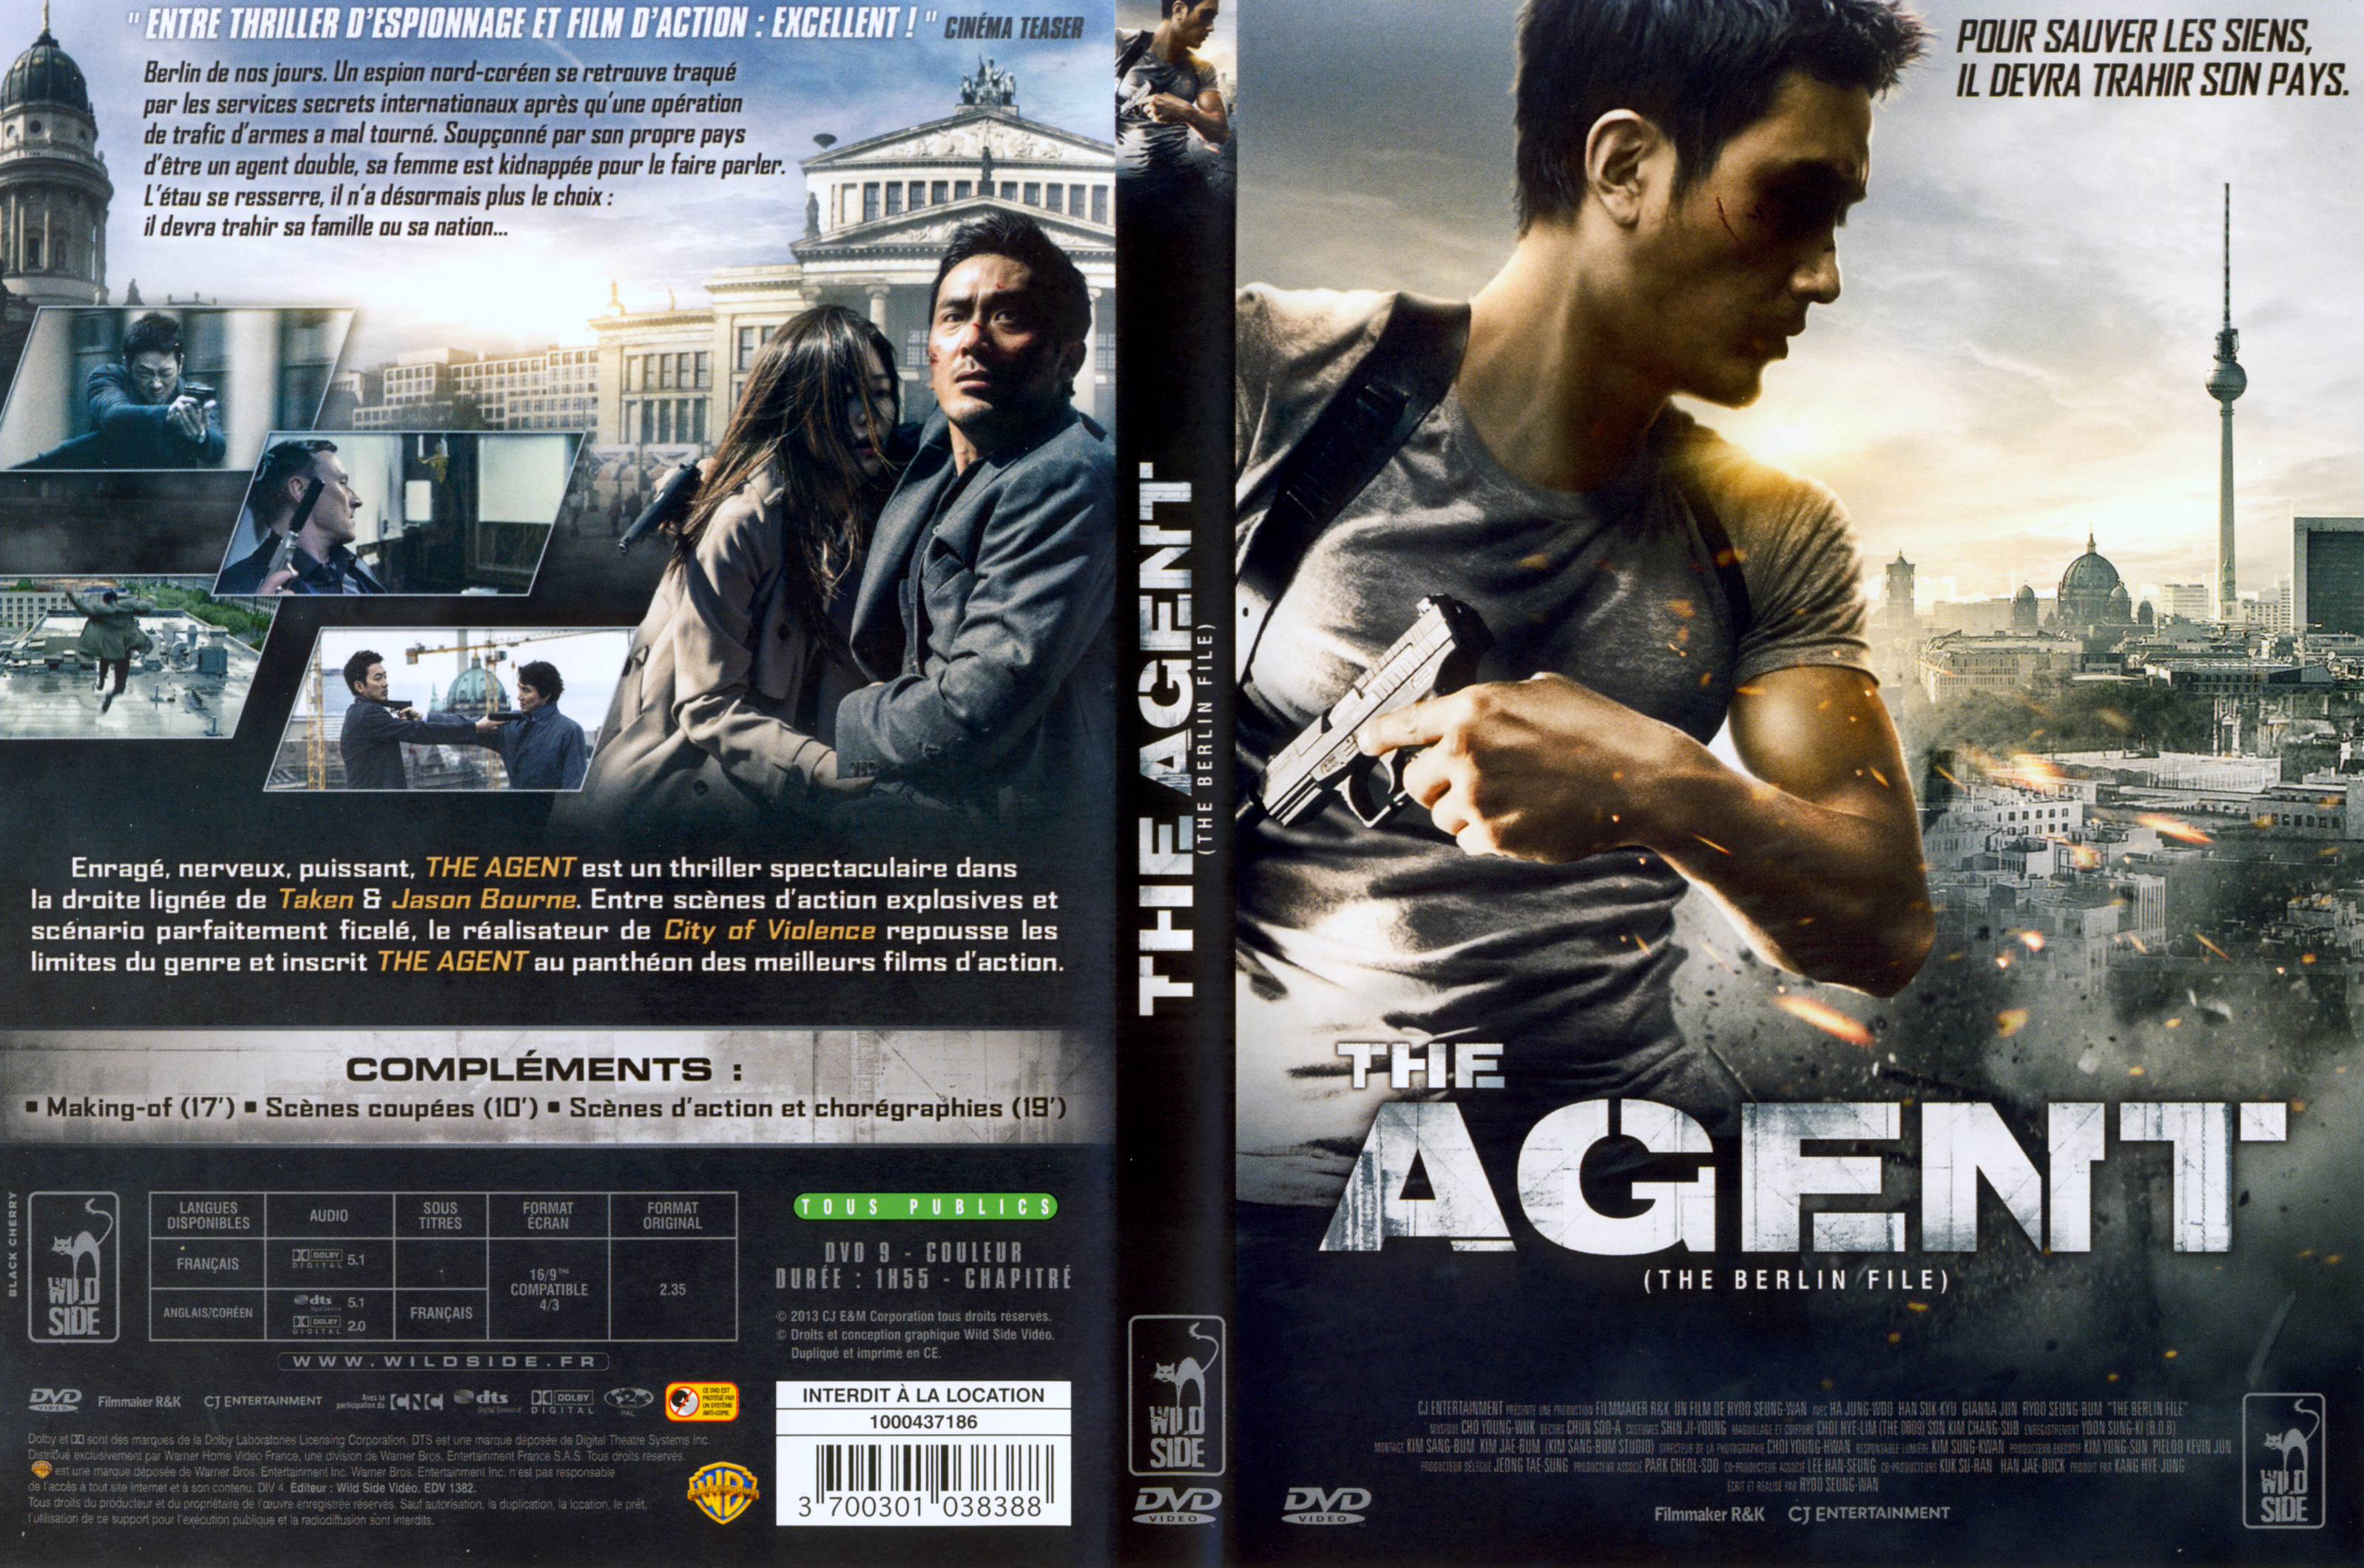 Jaquette DVD The Agent